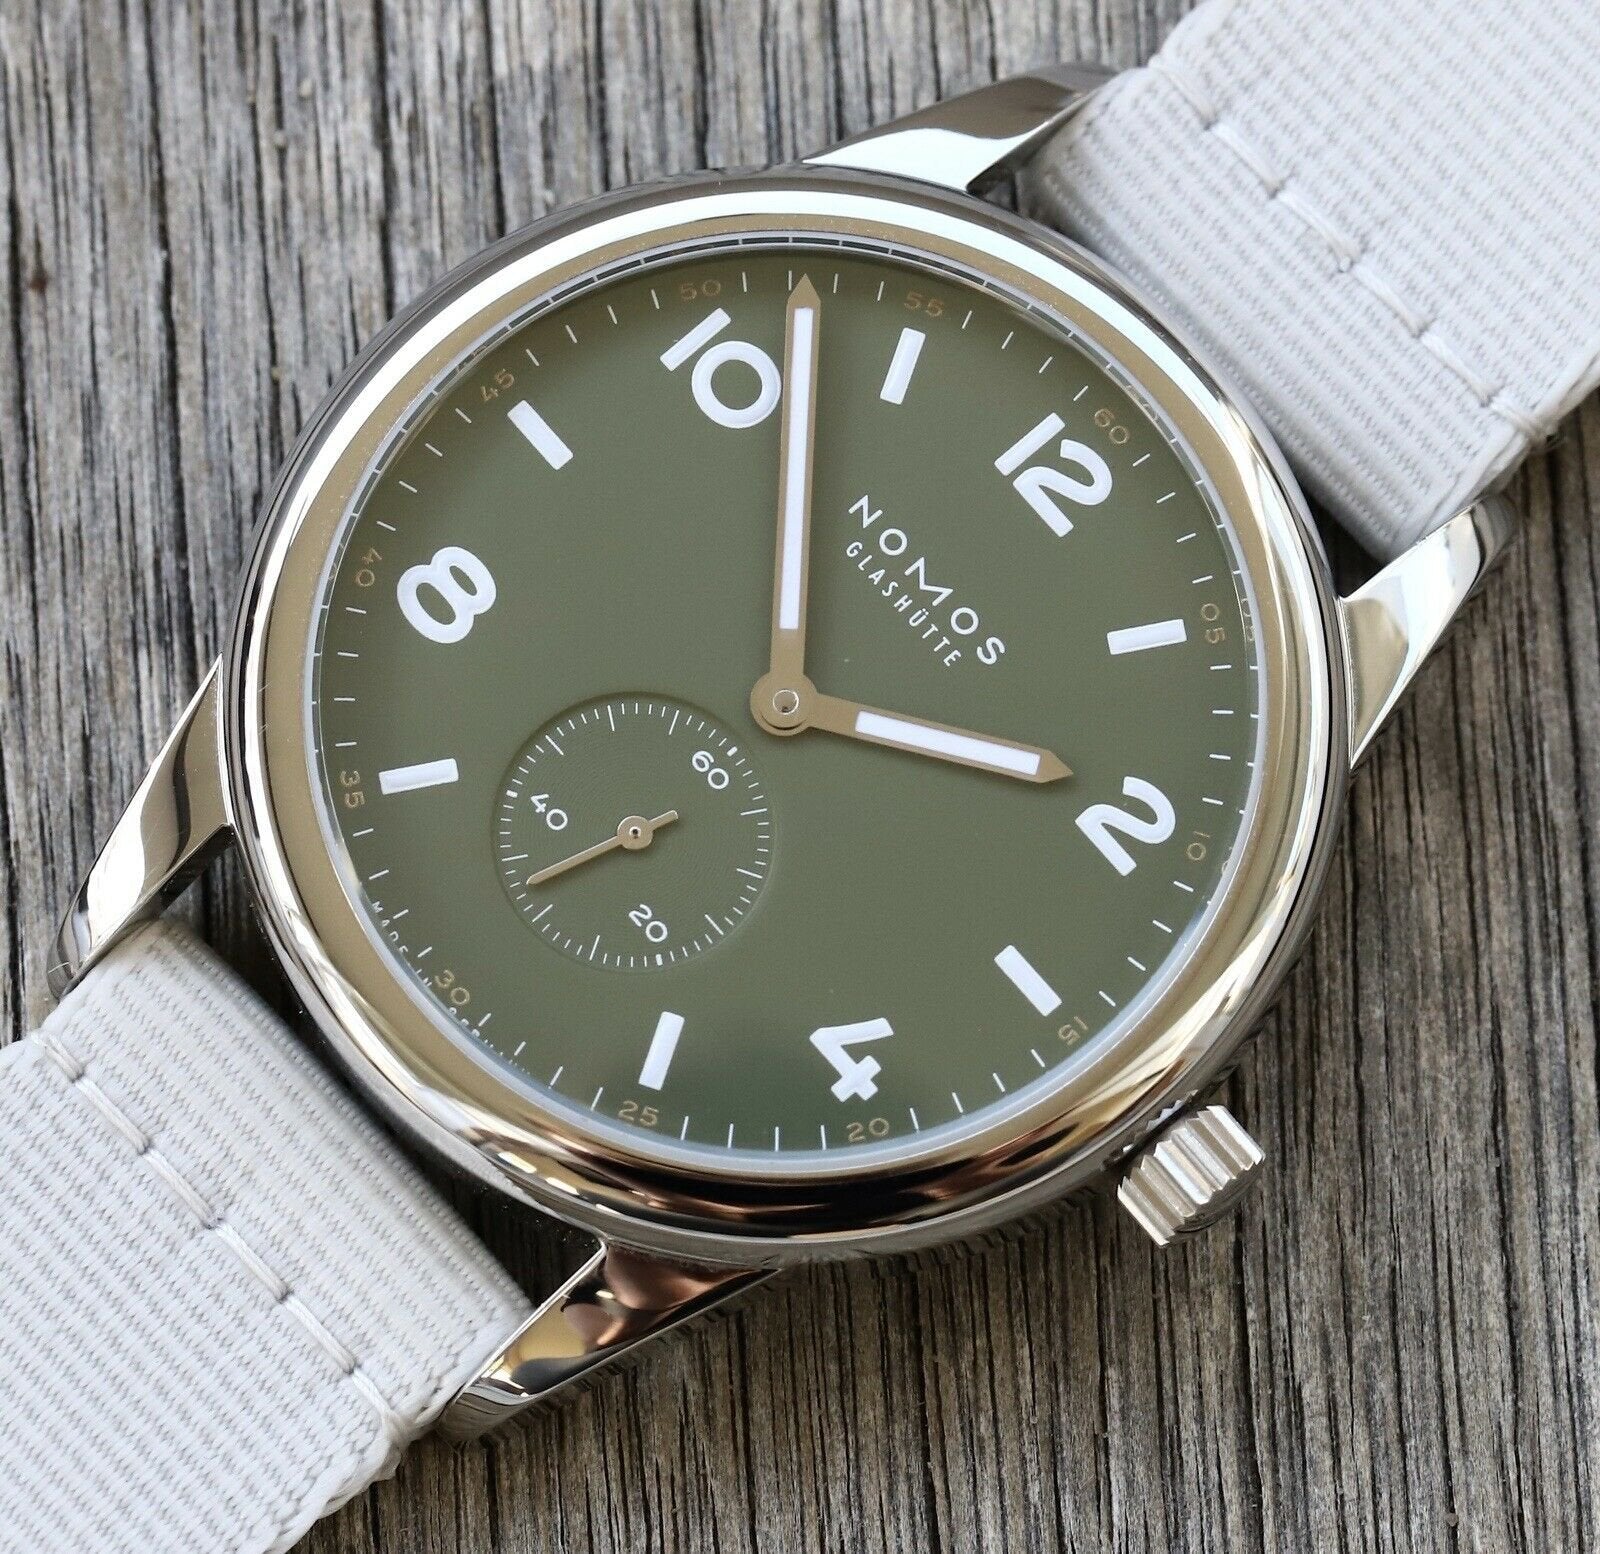 Nomos_Club_Automatic_175_Years_Limited_Edition_Olive_Green_753.S3_Watch_Vault_02.jpg